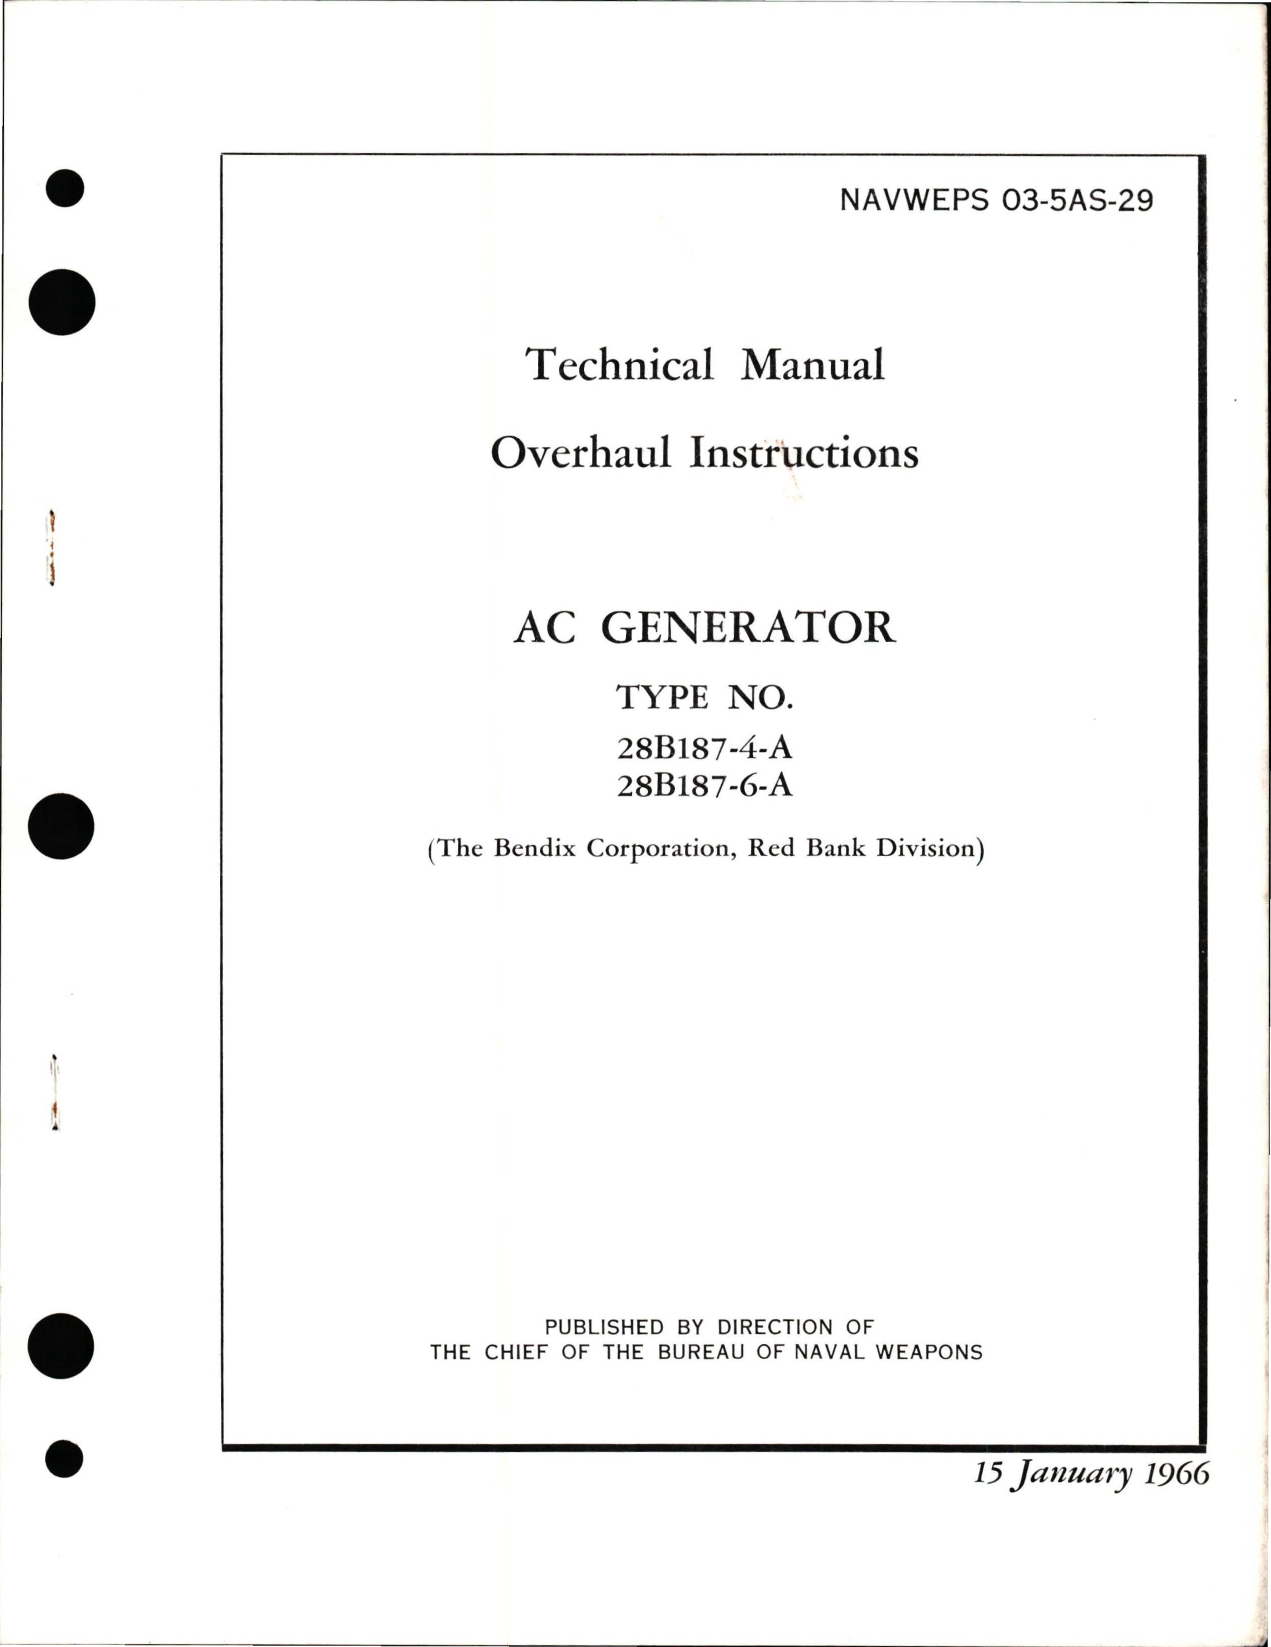 Sample page 1 from AirCorps Library document: Overhaul Instructions for AC Generator - Types 28B187-4-A and 28B187-6-A